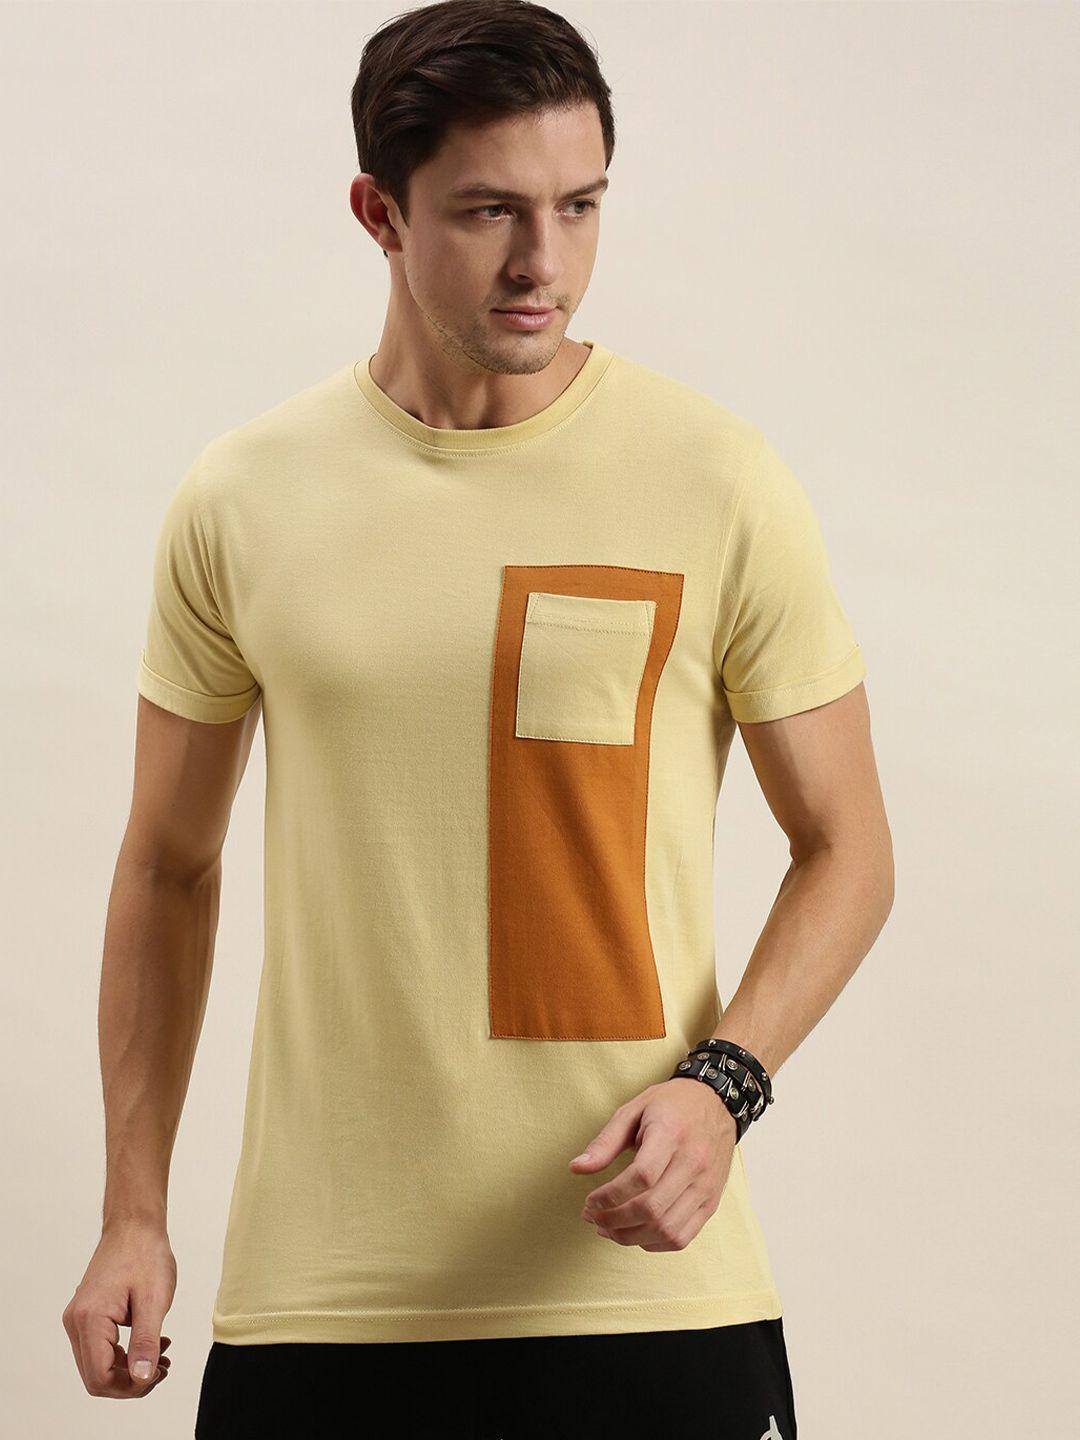 difference of opinion men yellow pockets t-shirt